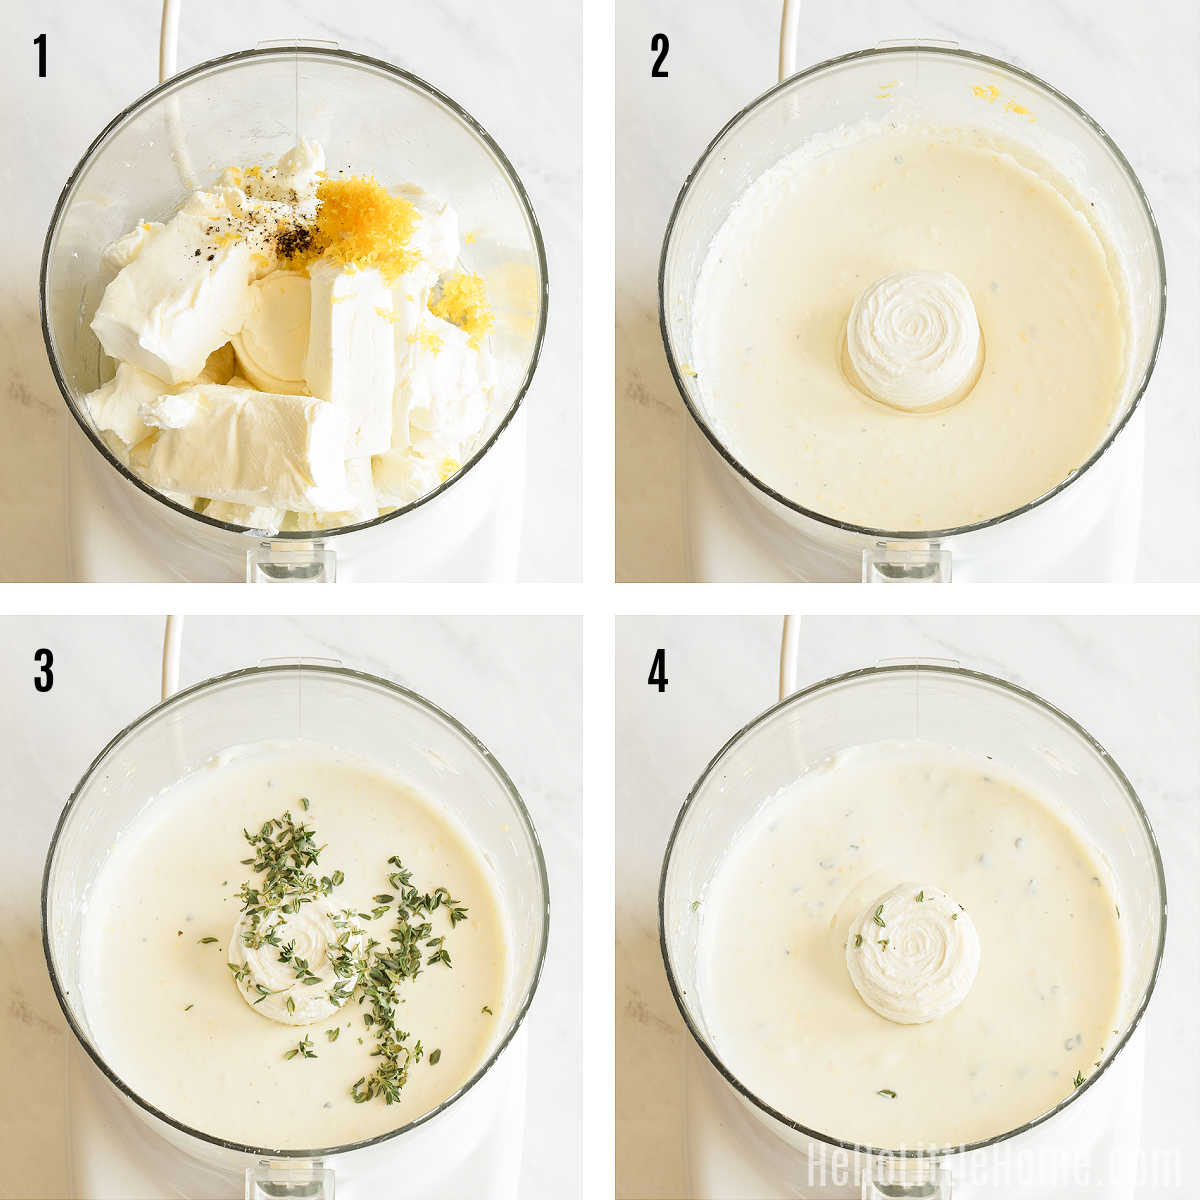 A photo collage showing how to make the recipe step-by-step.